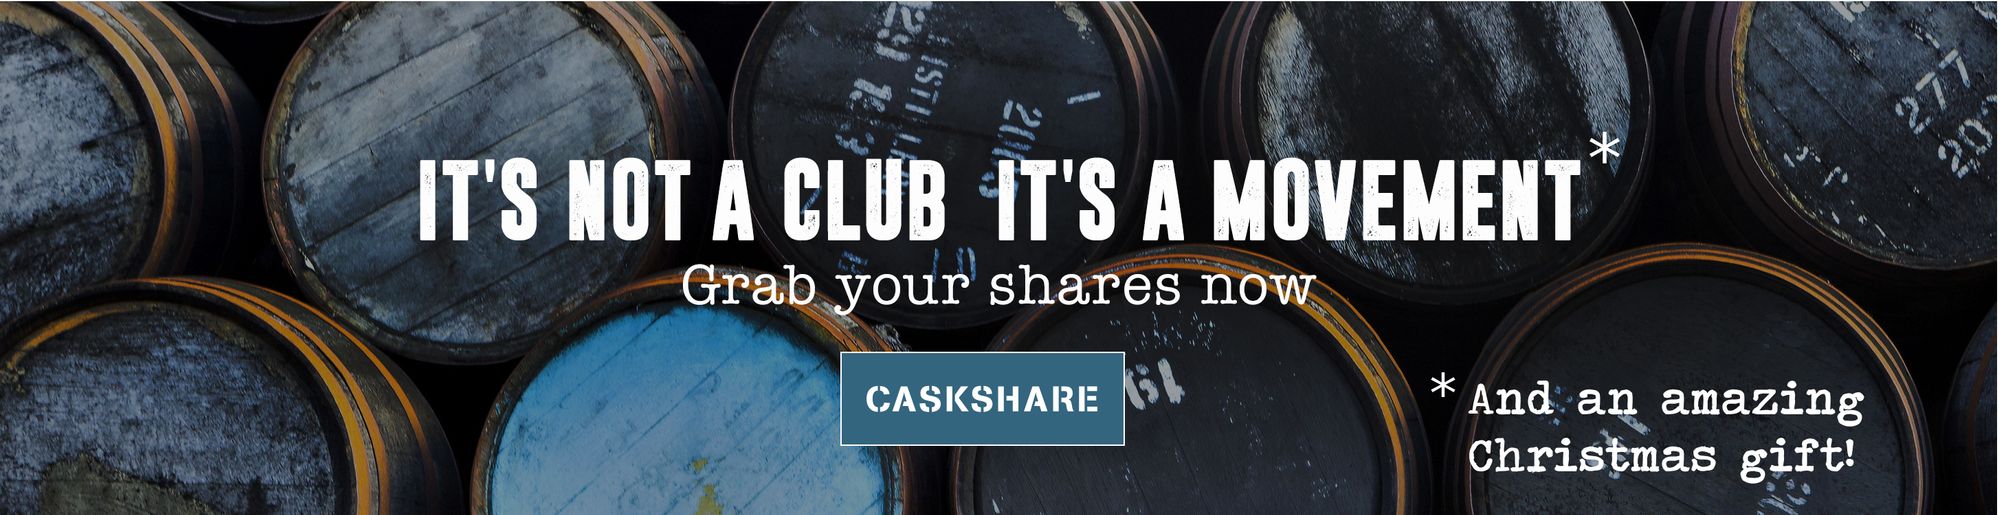 Caskshare as a Gift! Our 7 Step Guide for a One-of-a-Kind Whisky Gift